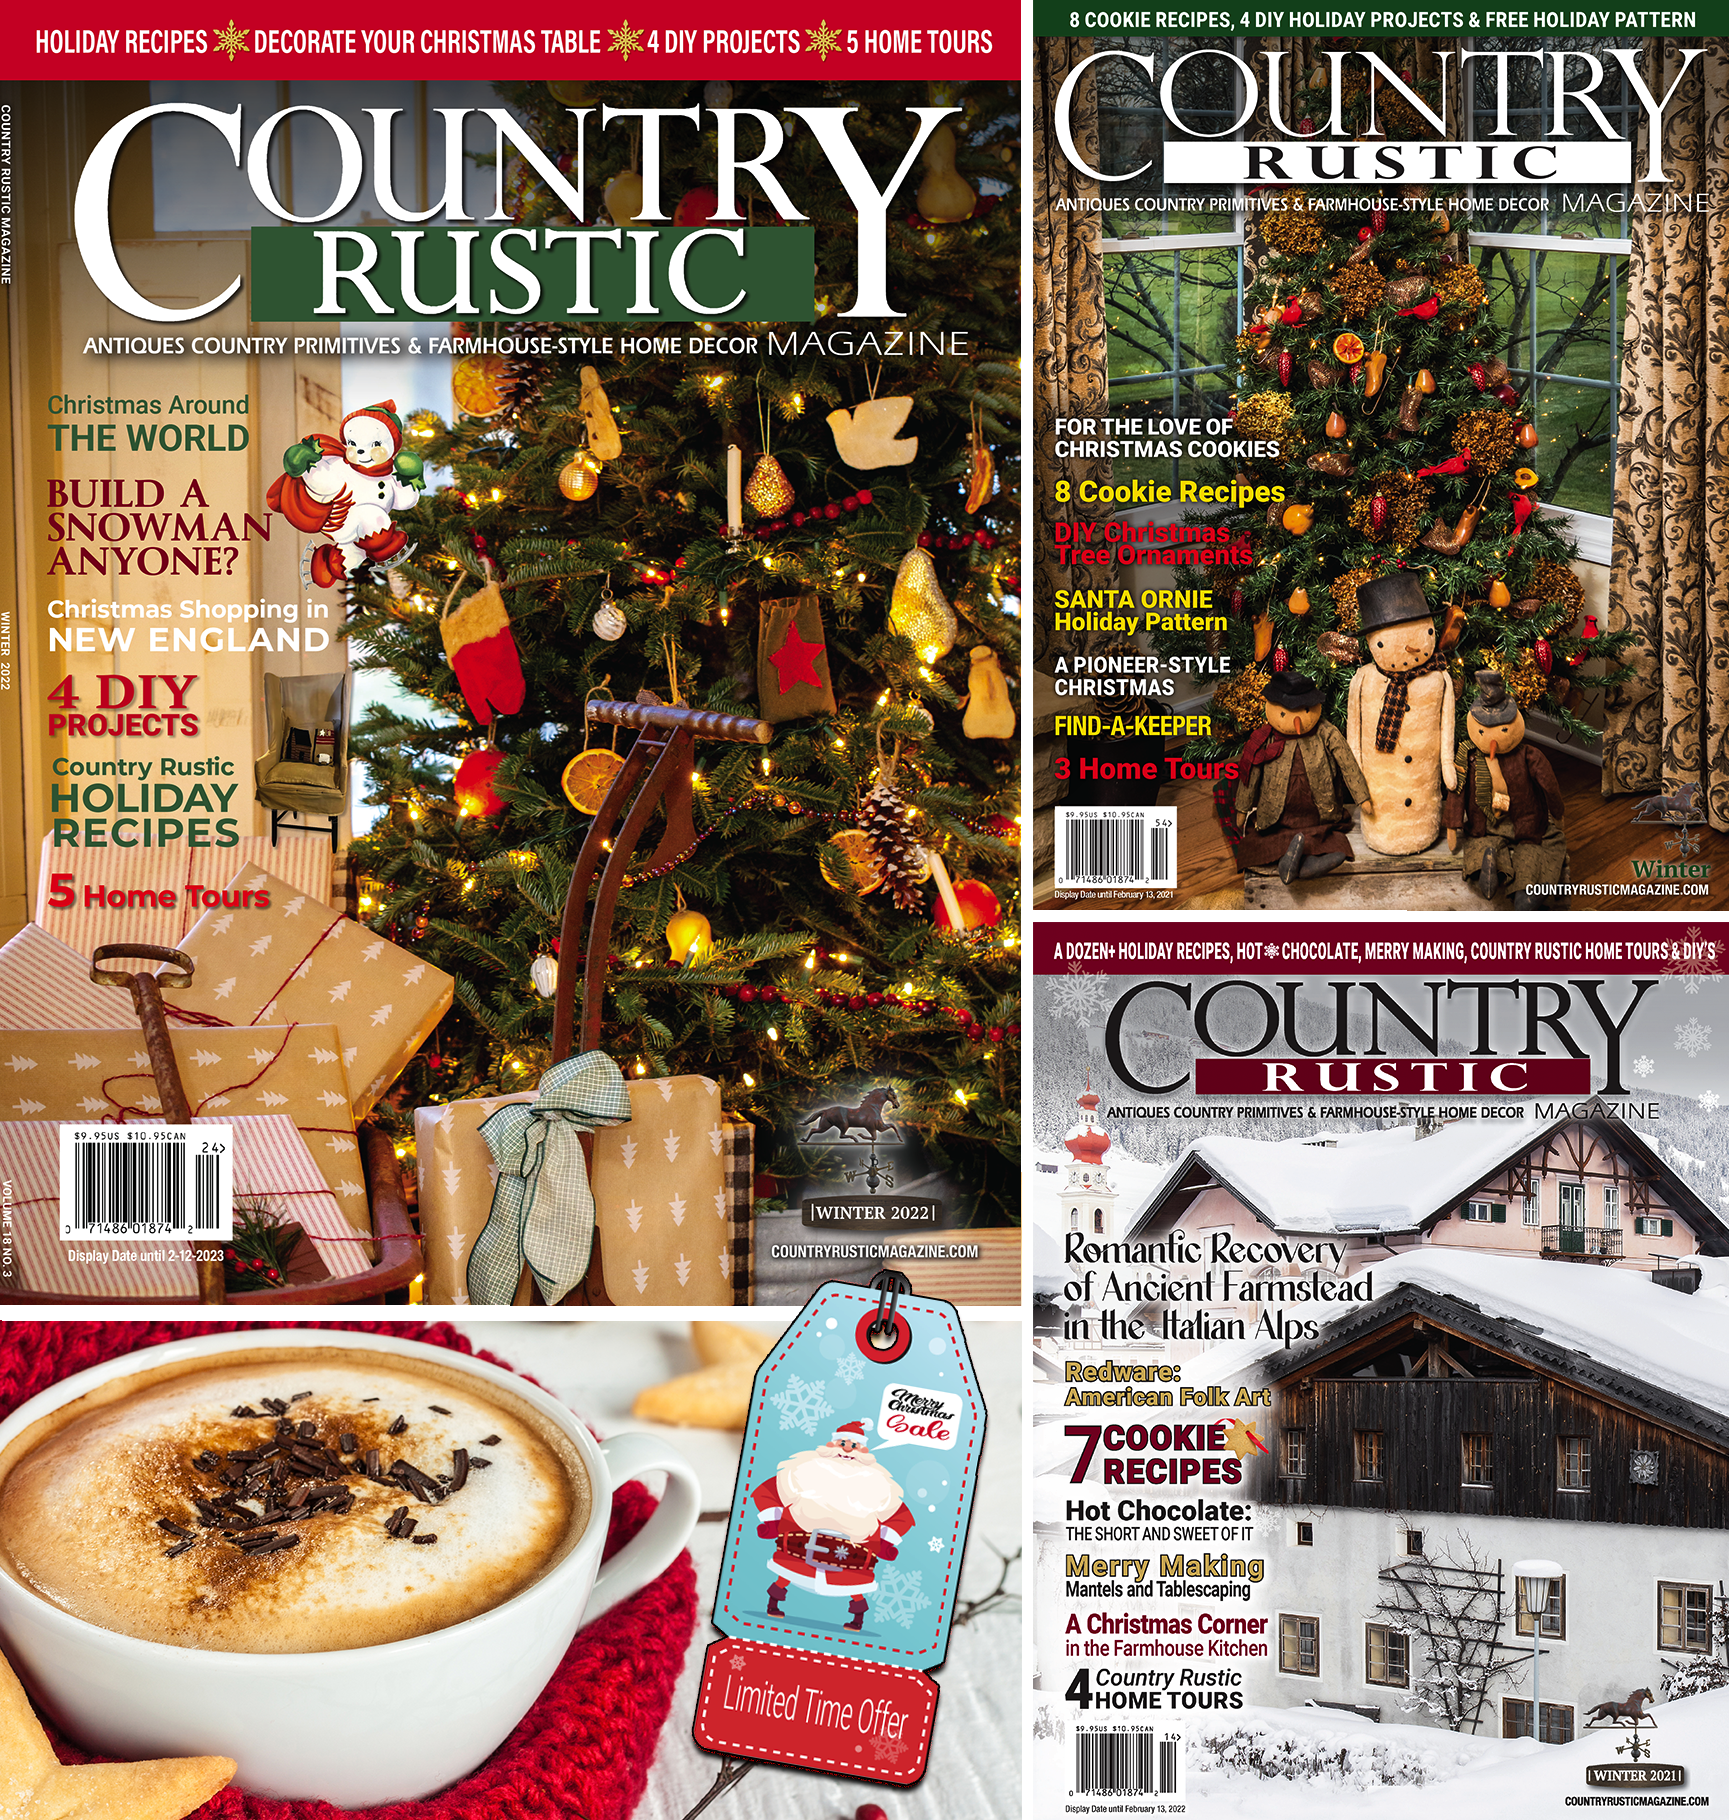 Country Rustic's Holiday Trio Sampler